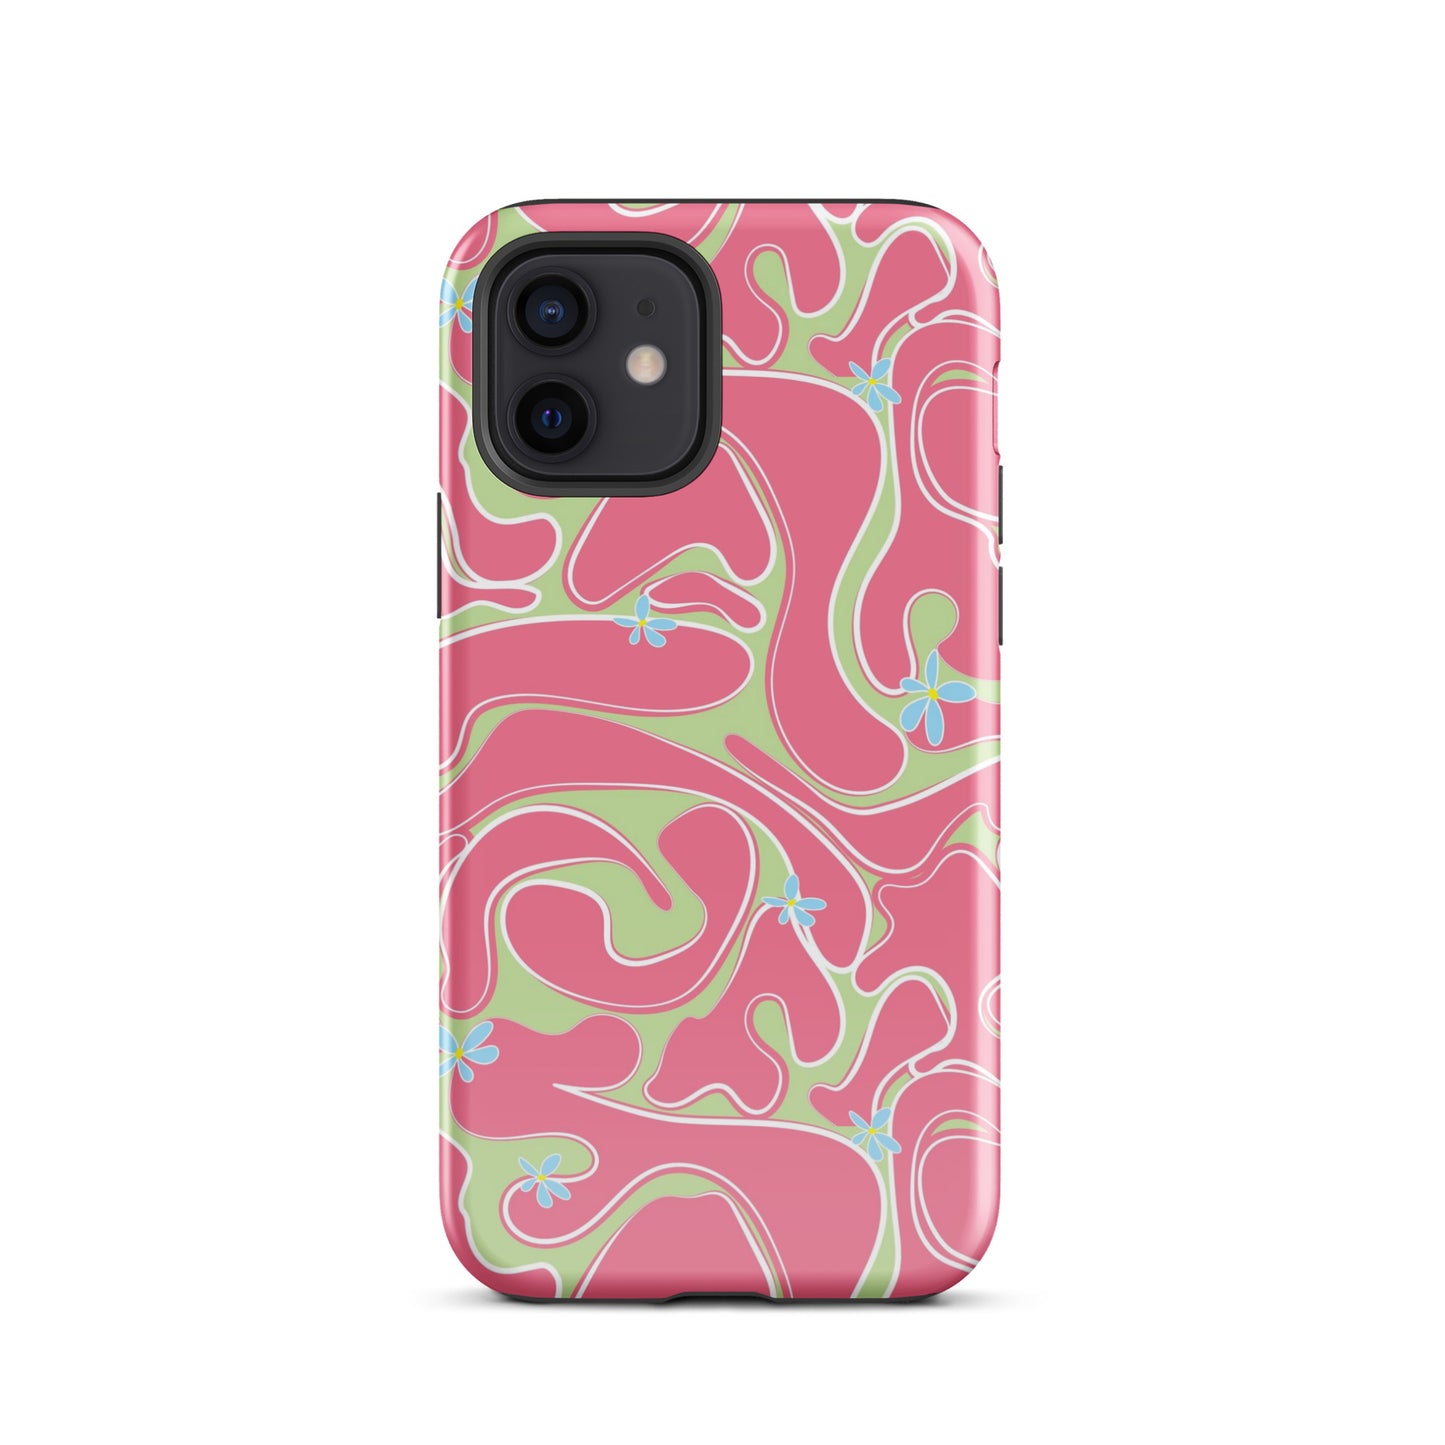 Reef Waves iPhone Case Glossy iPhone 12